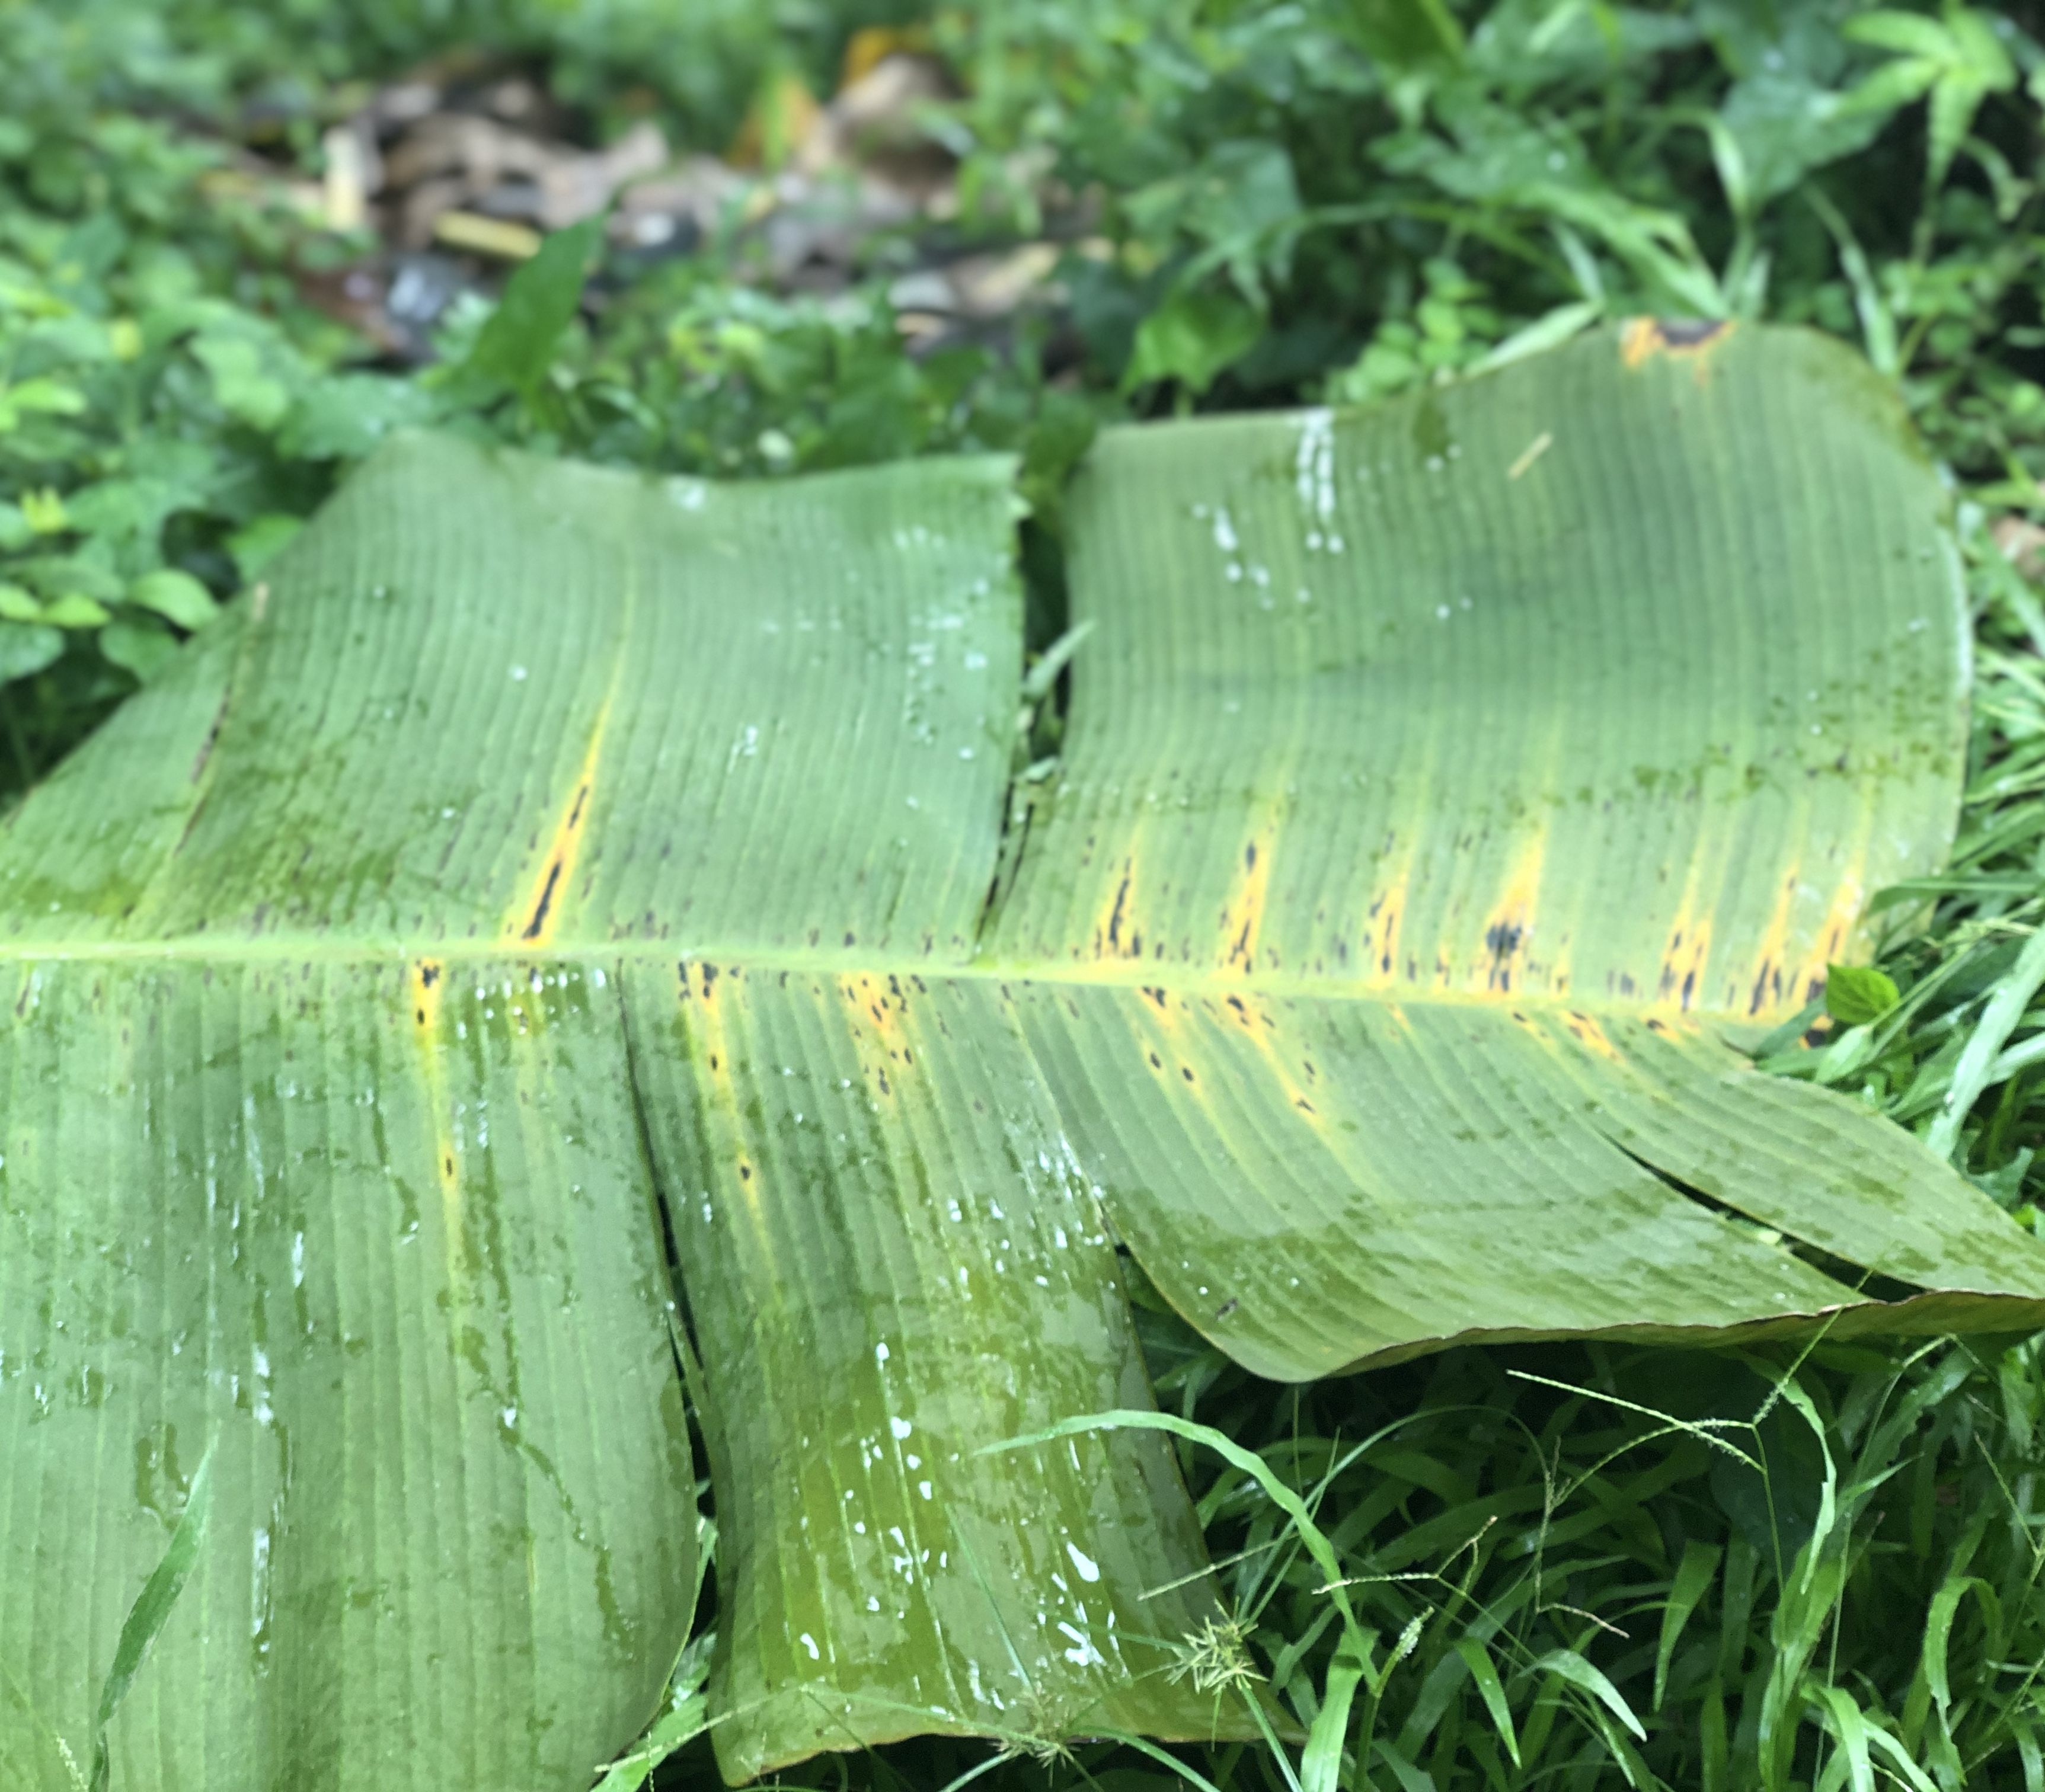 Black leaf streak fungus that inhibits photosynthesis within the banana leaves, destroying crops. Image by Madison Stewart. Costa Rica, 2019. 